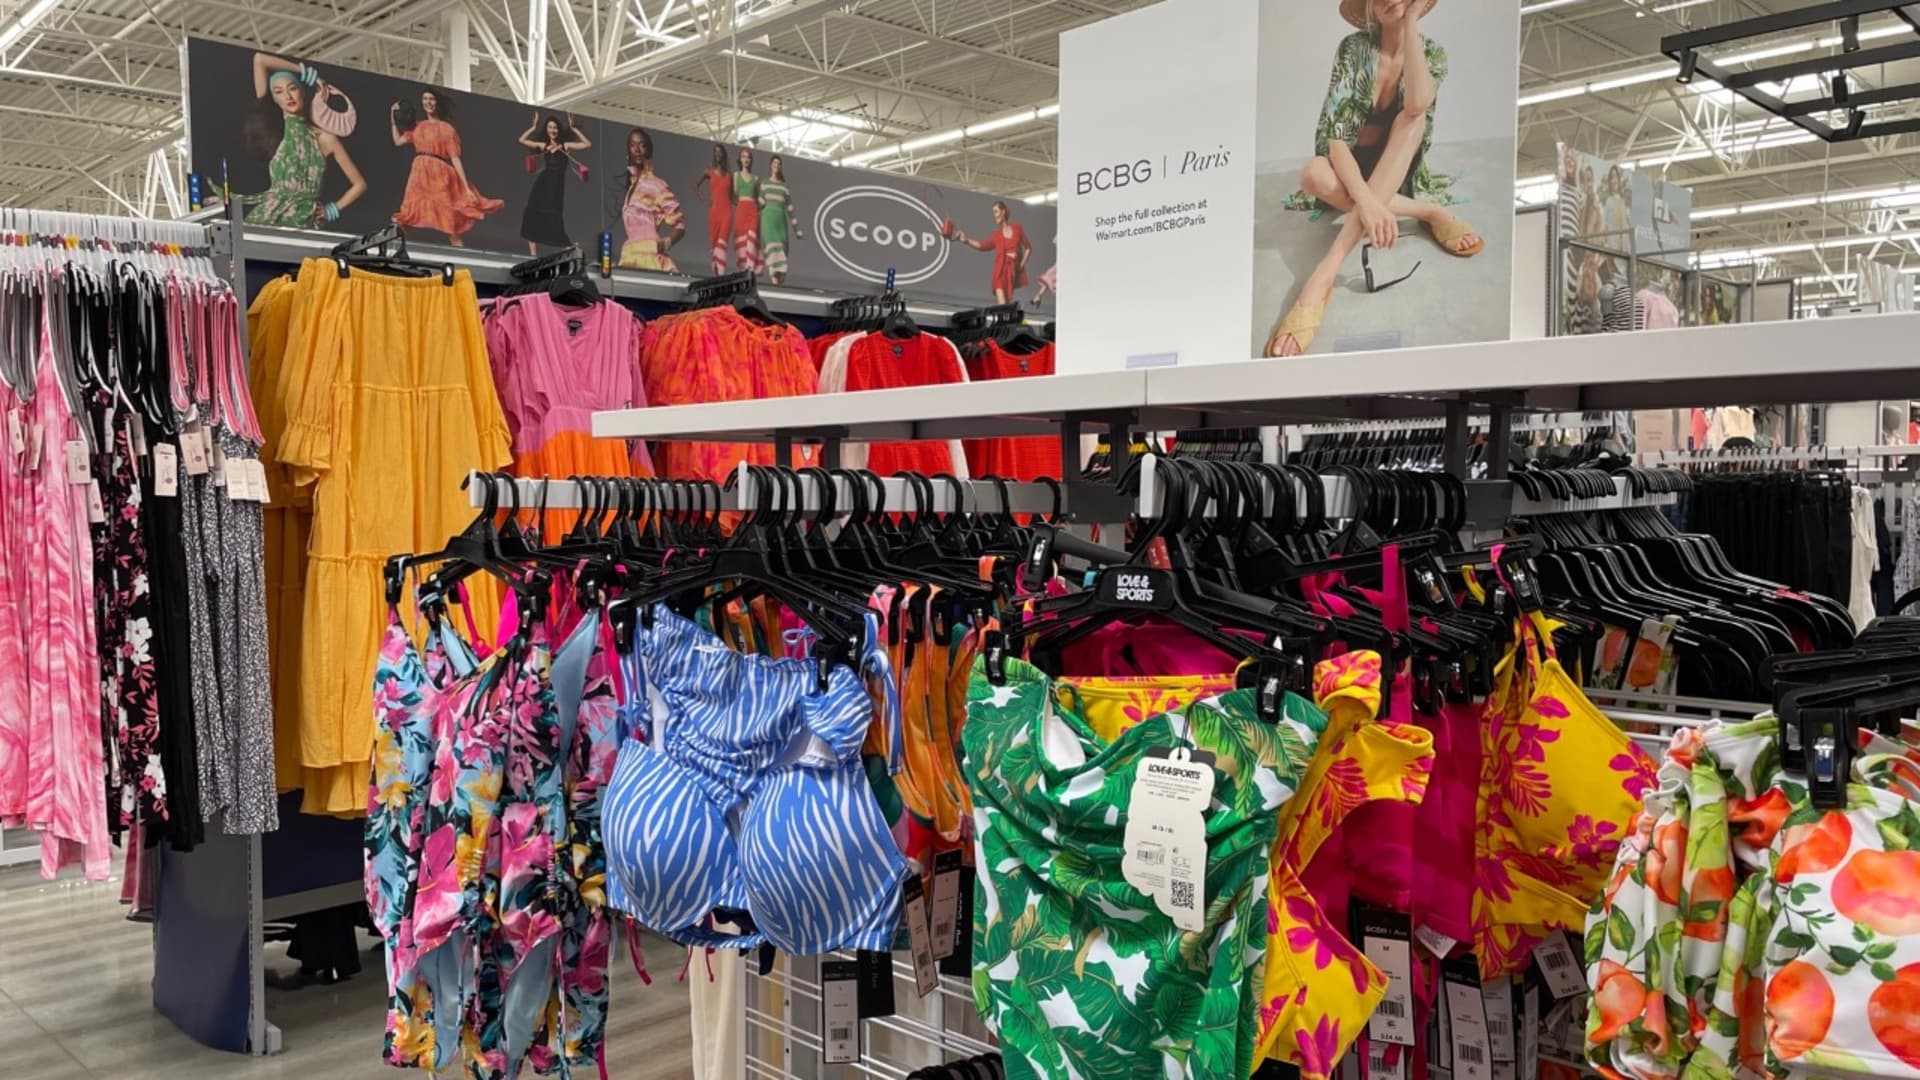 Walmart launched a lot of apparel and home brands. Now, that strategy will be put to the test